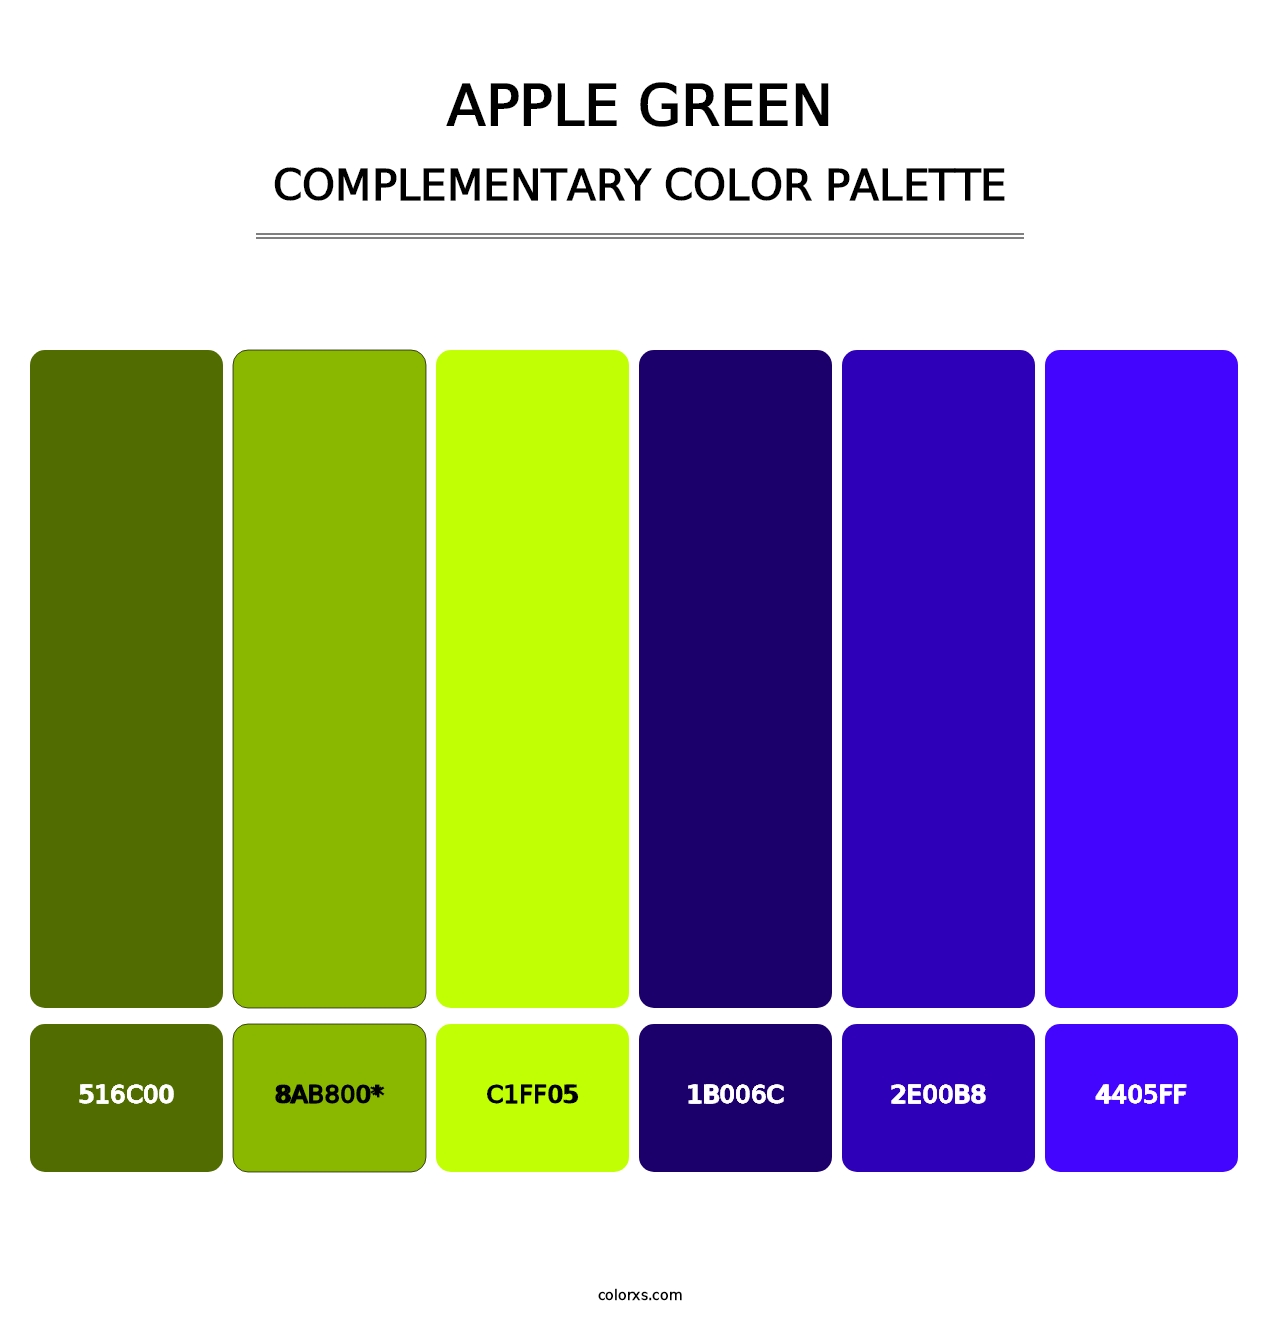 Apple Green - Complementary Color Palette